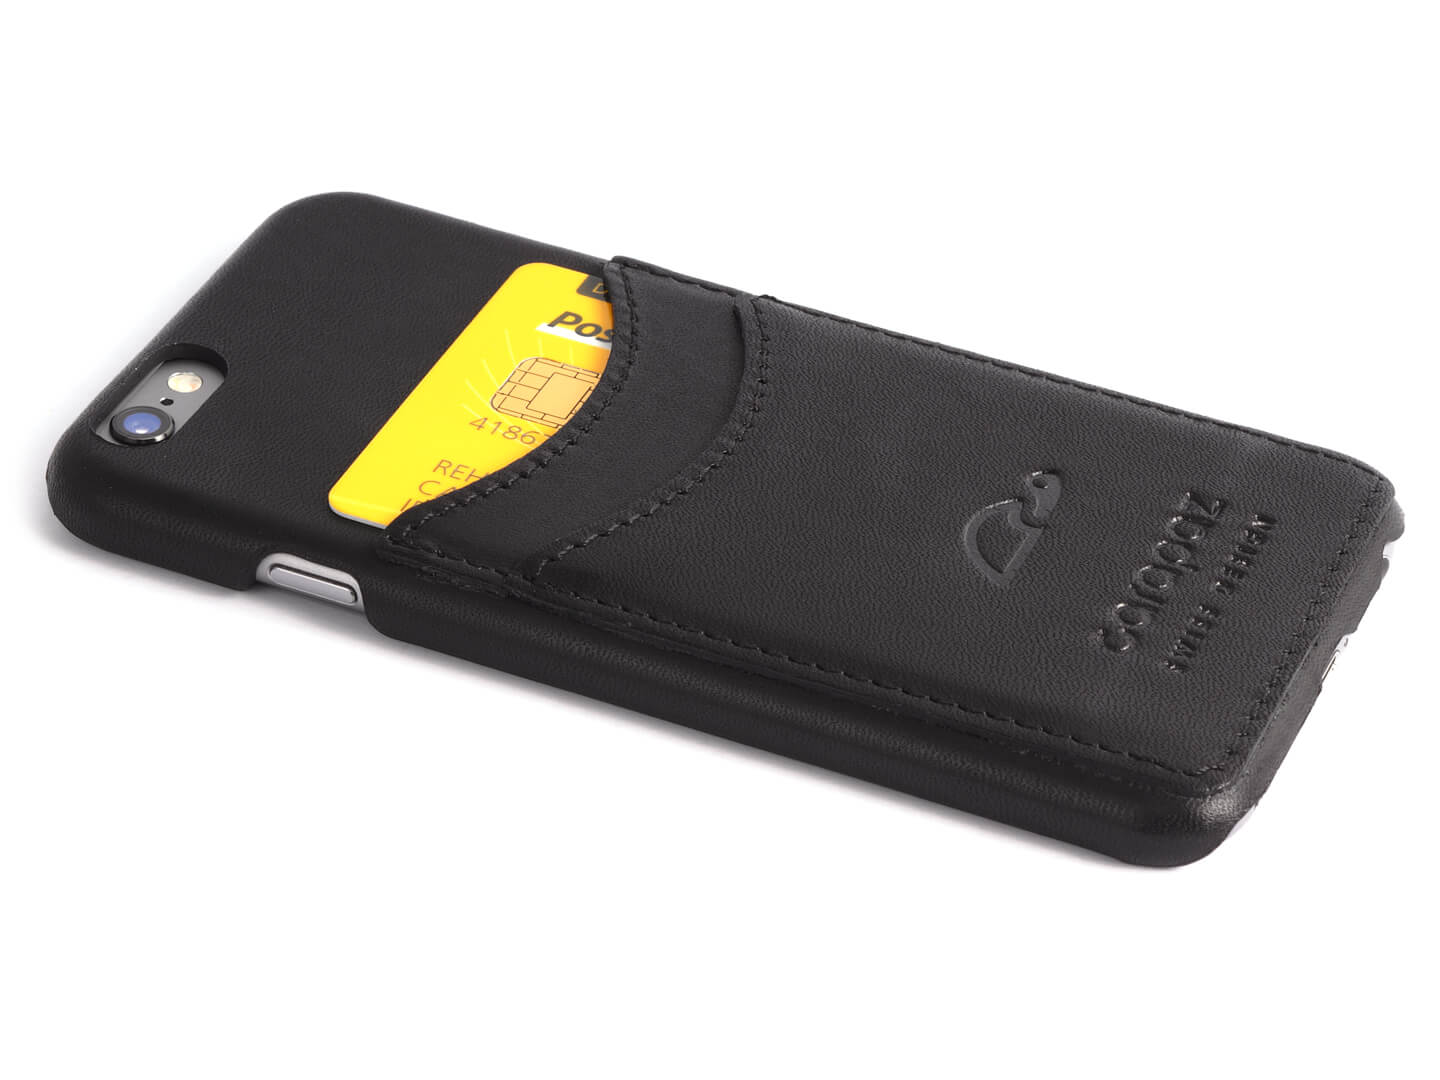 iPhone 6 black leather case - cards slots - Carapaz